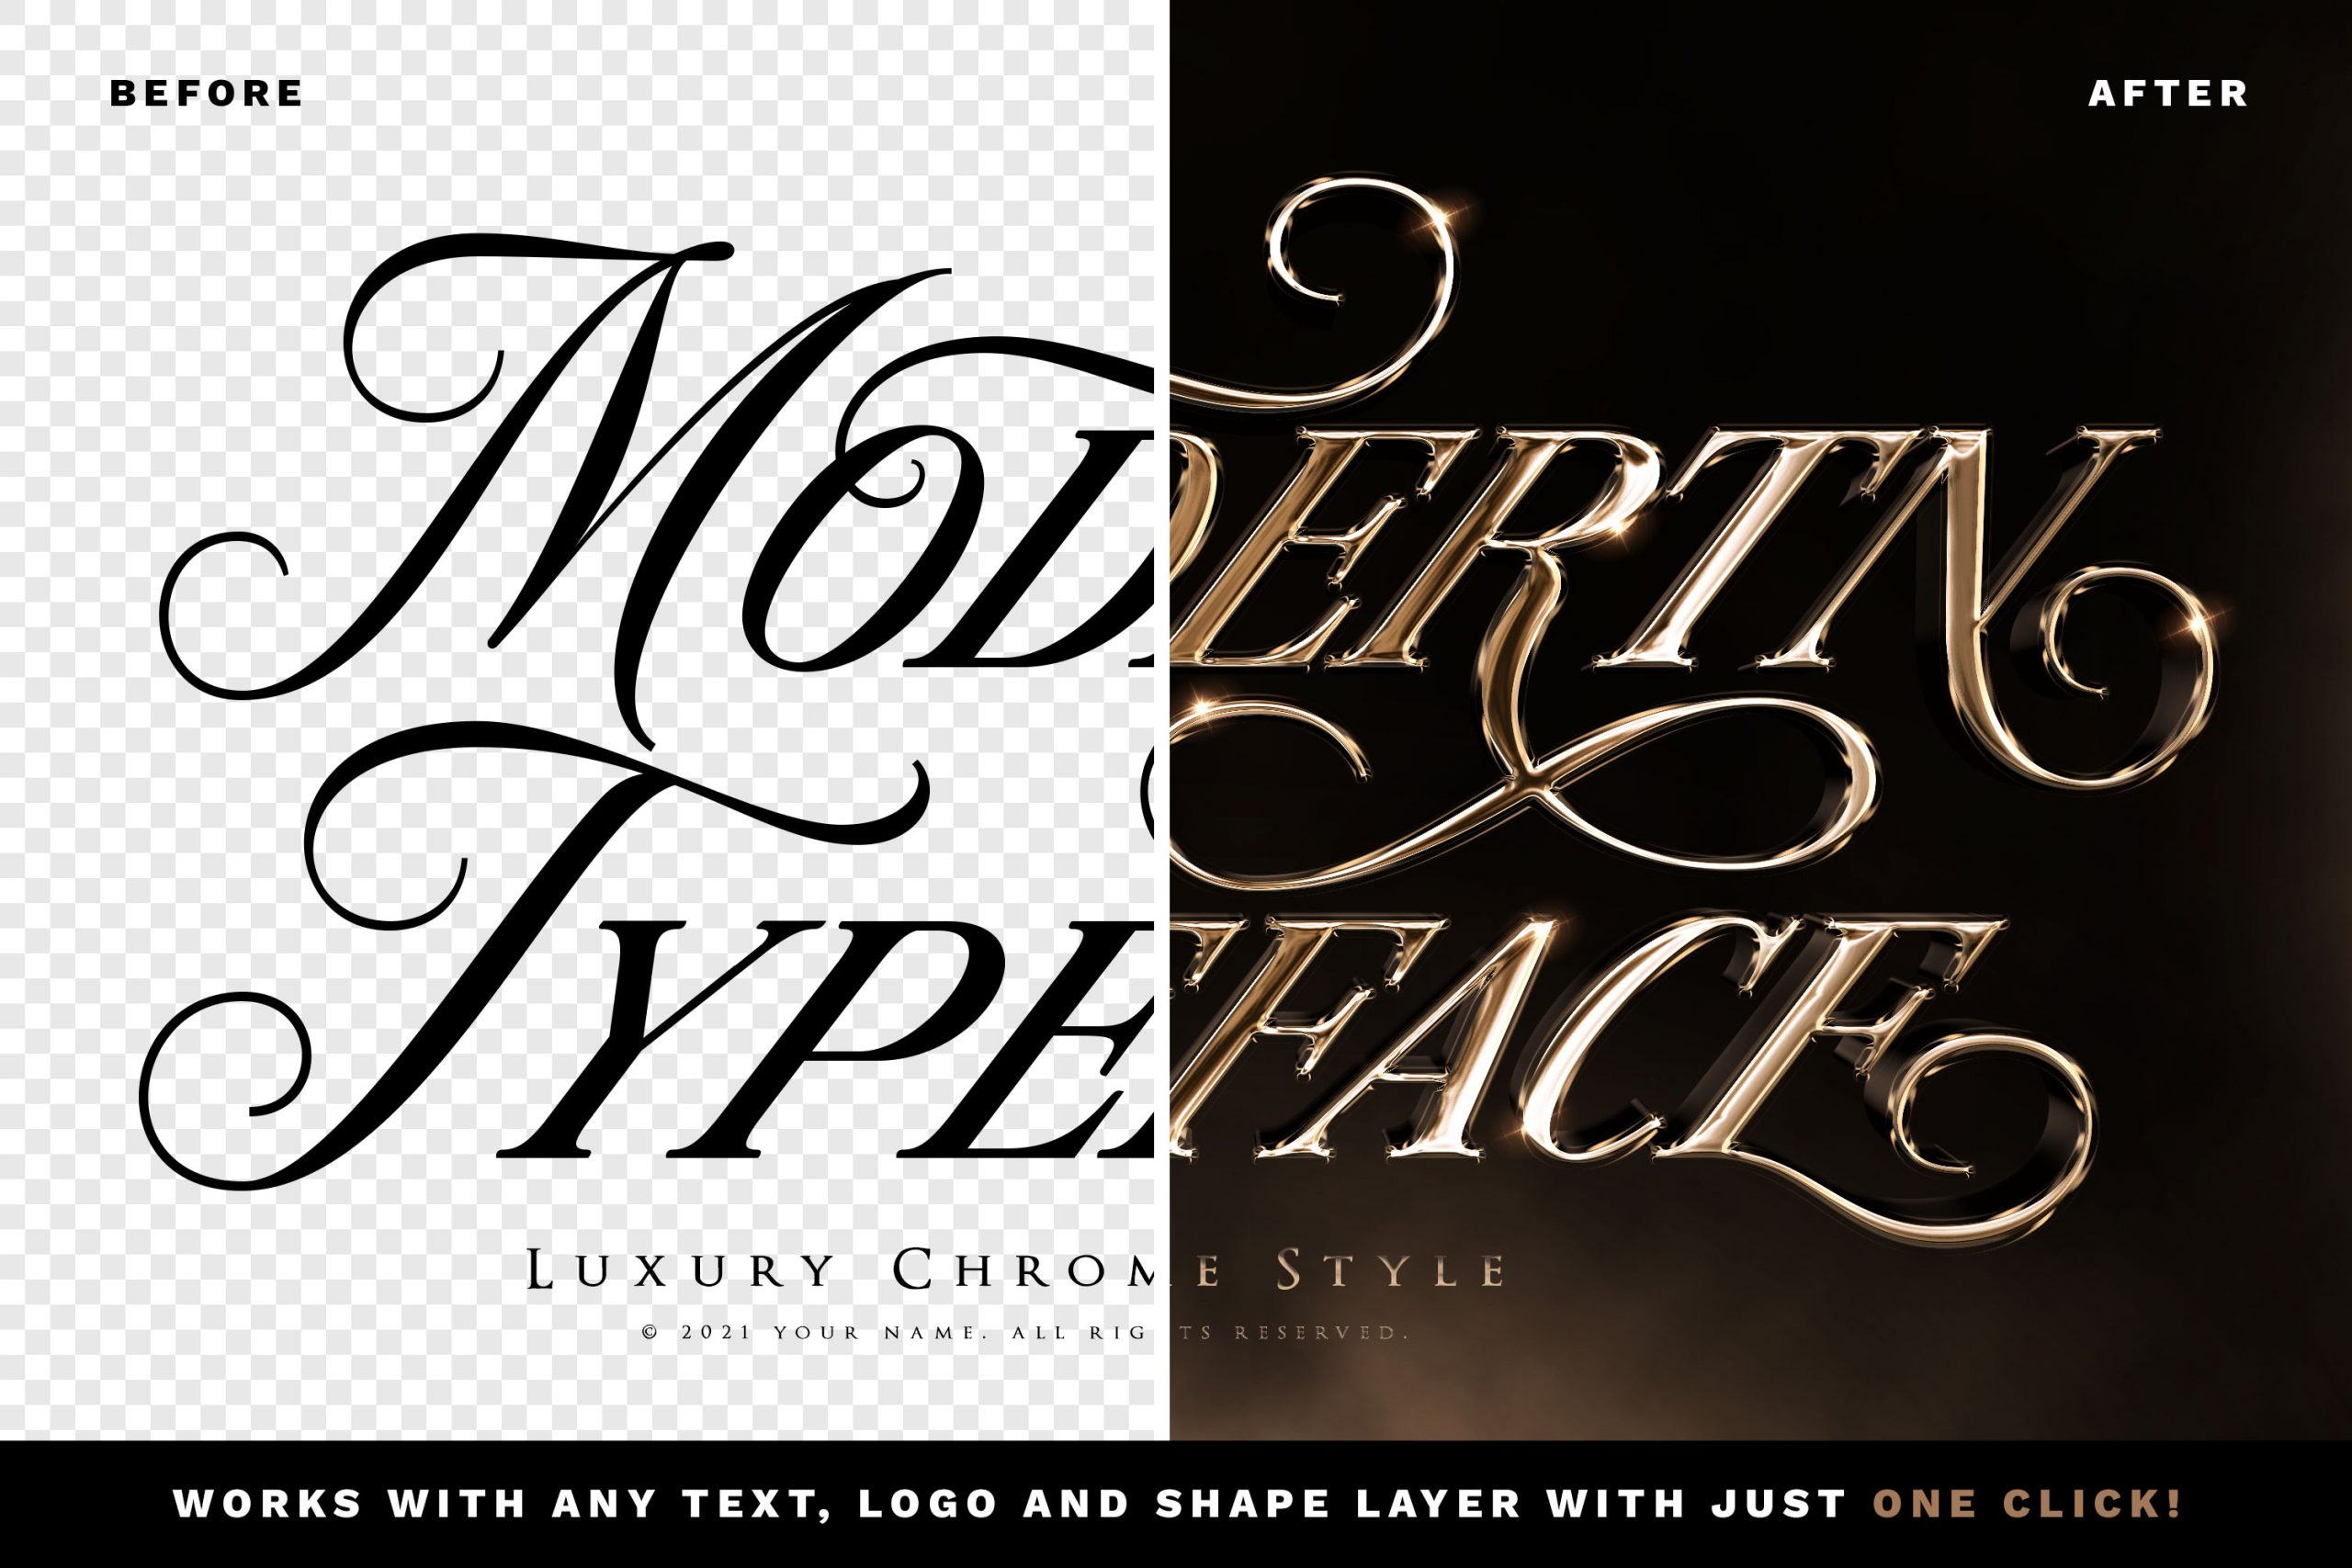 Luxury Chrome Text and Logo Style PSD Template | Hyperpix